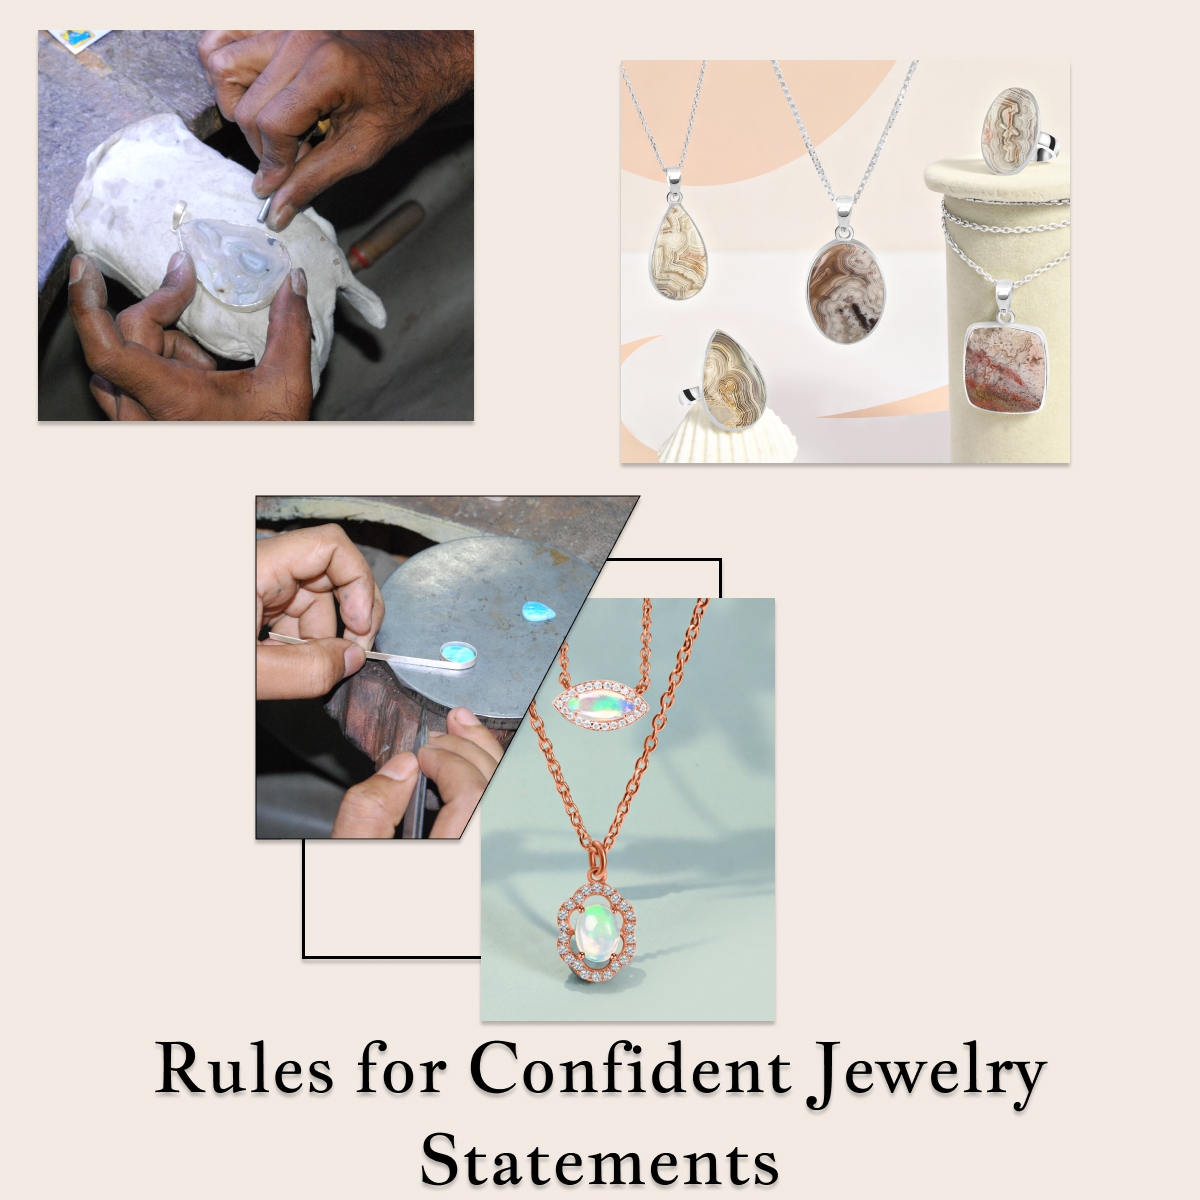 Some General Rules for Wearing Statement Jewelry with Confidence